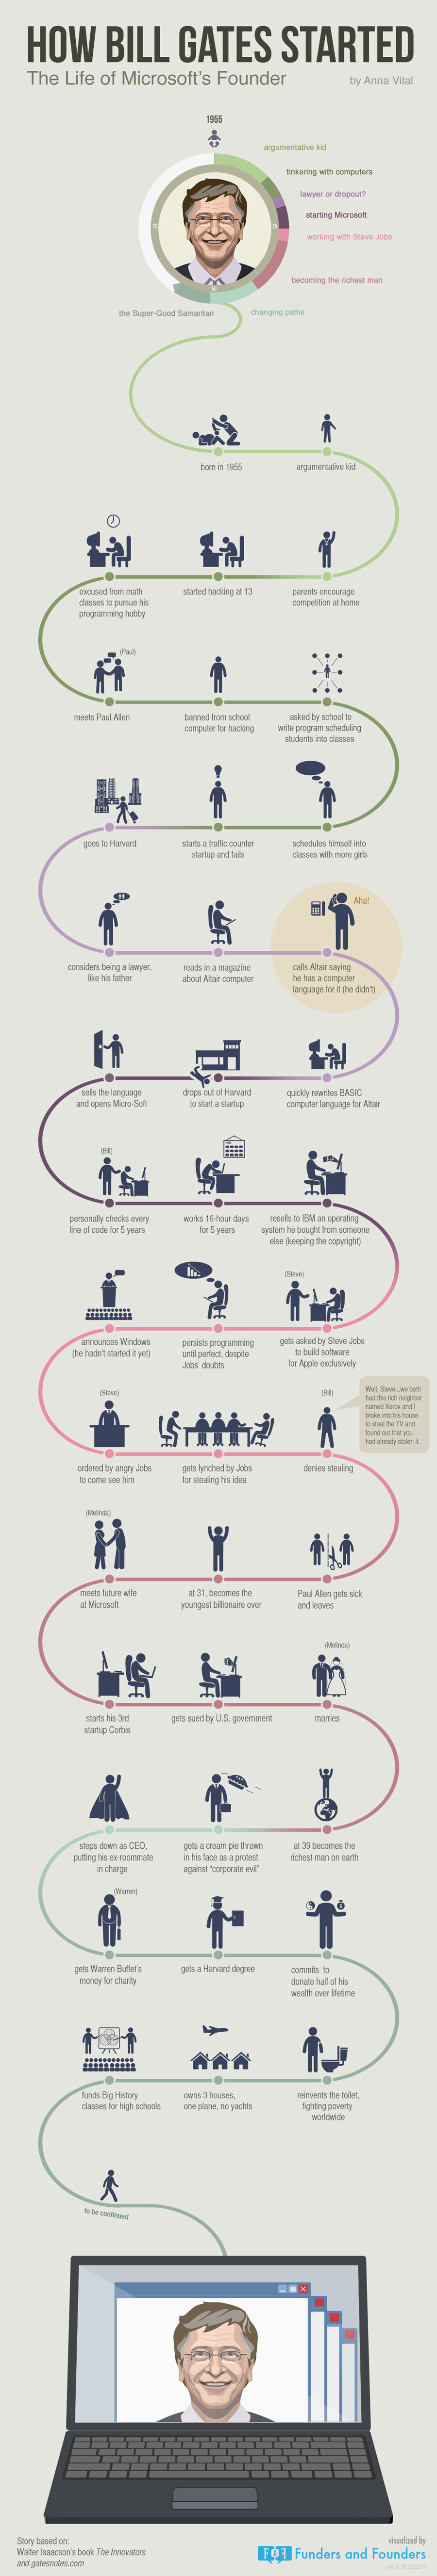 How Bill Gates started, Microsoft founder infographic